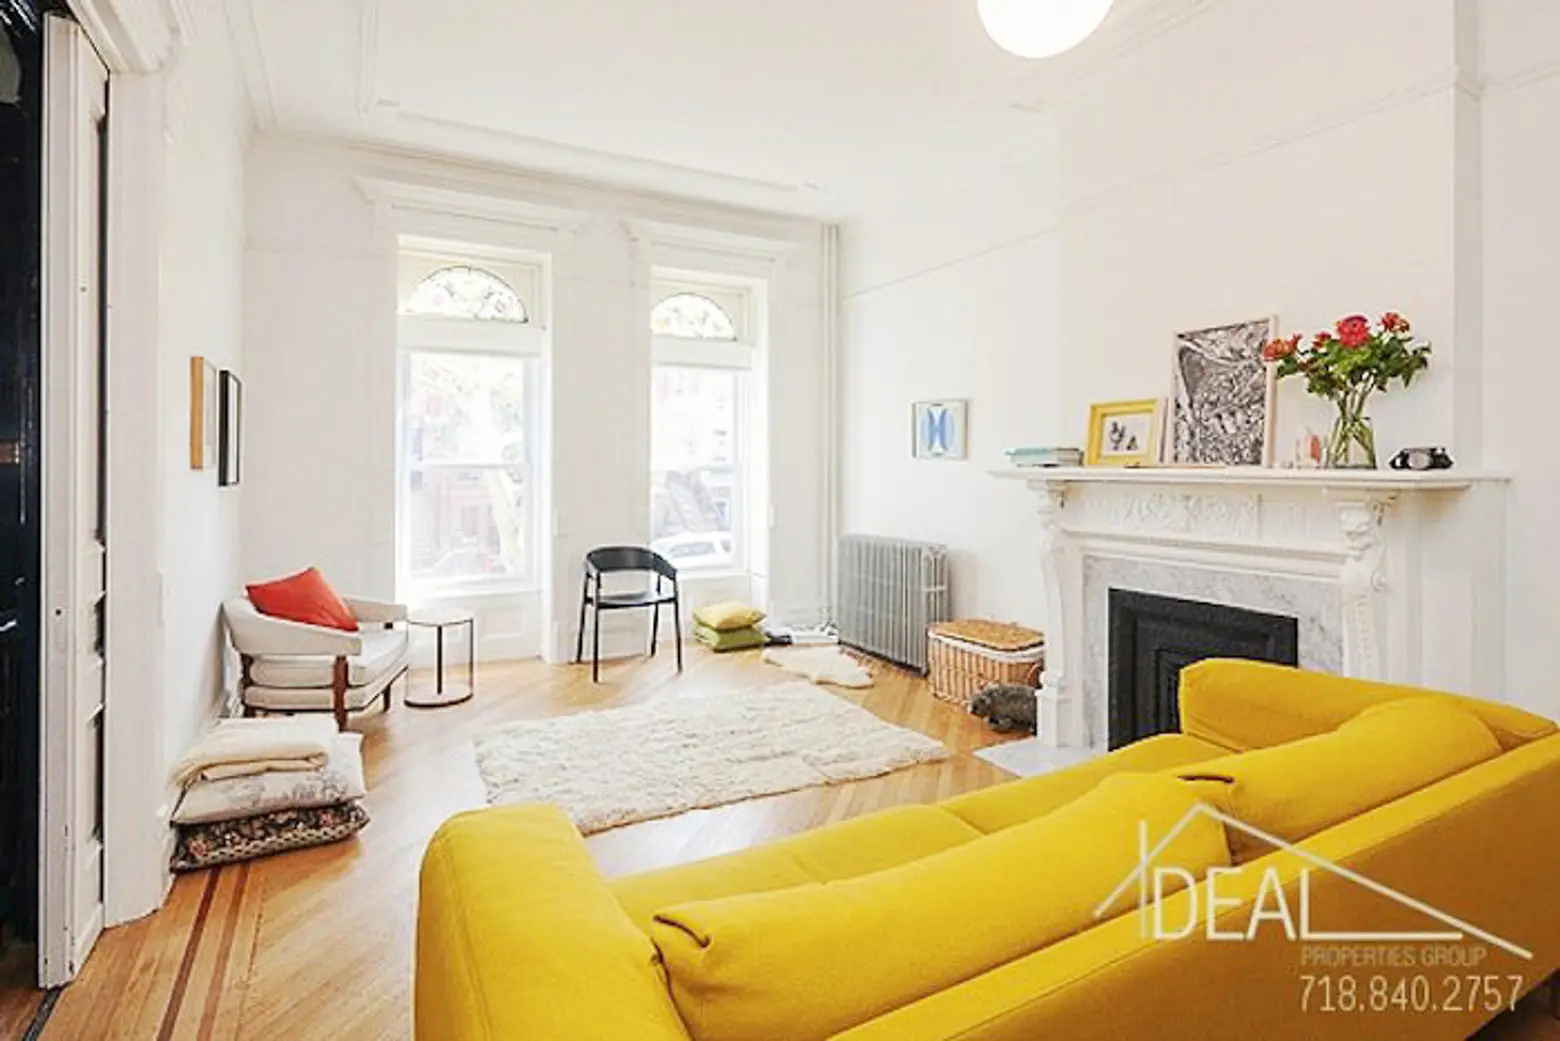 The Parlor Floor’s the Star at This Bed Stuy Rental, Asking $4,500 a Month